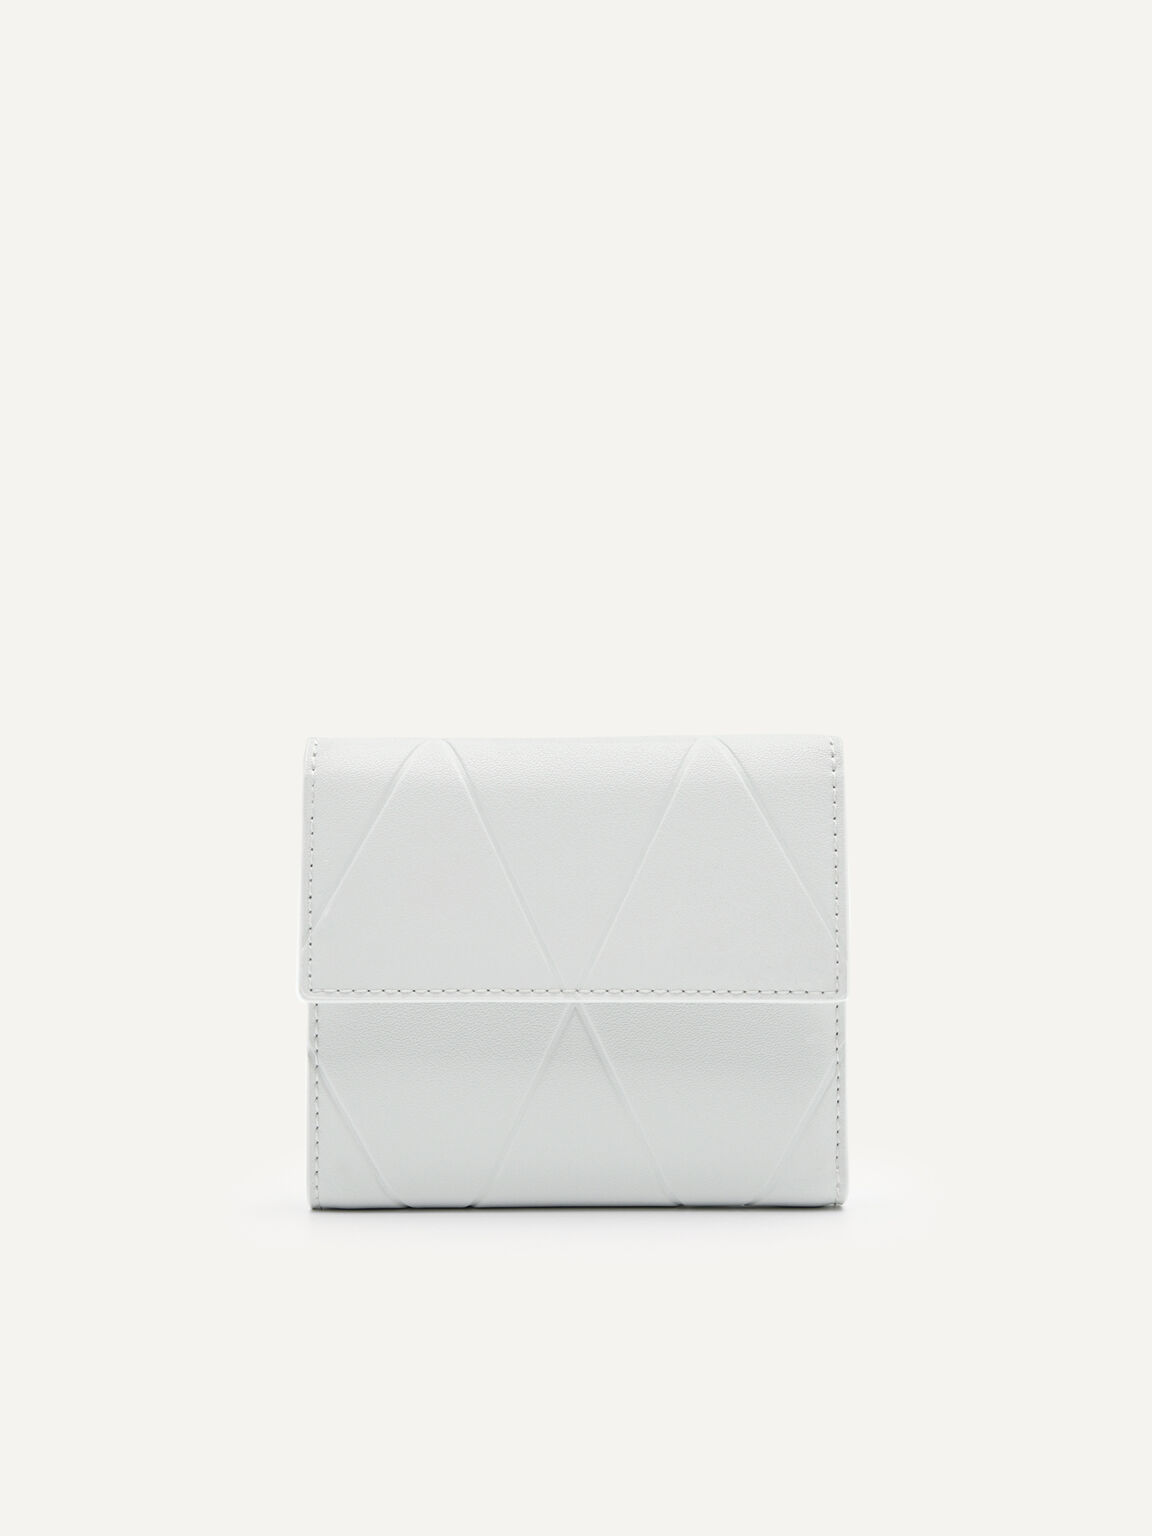 Leather Tri-Fold Wallet in Pixel, White